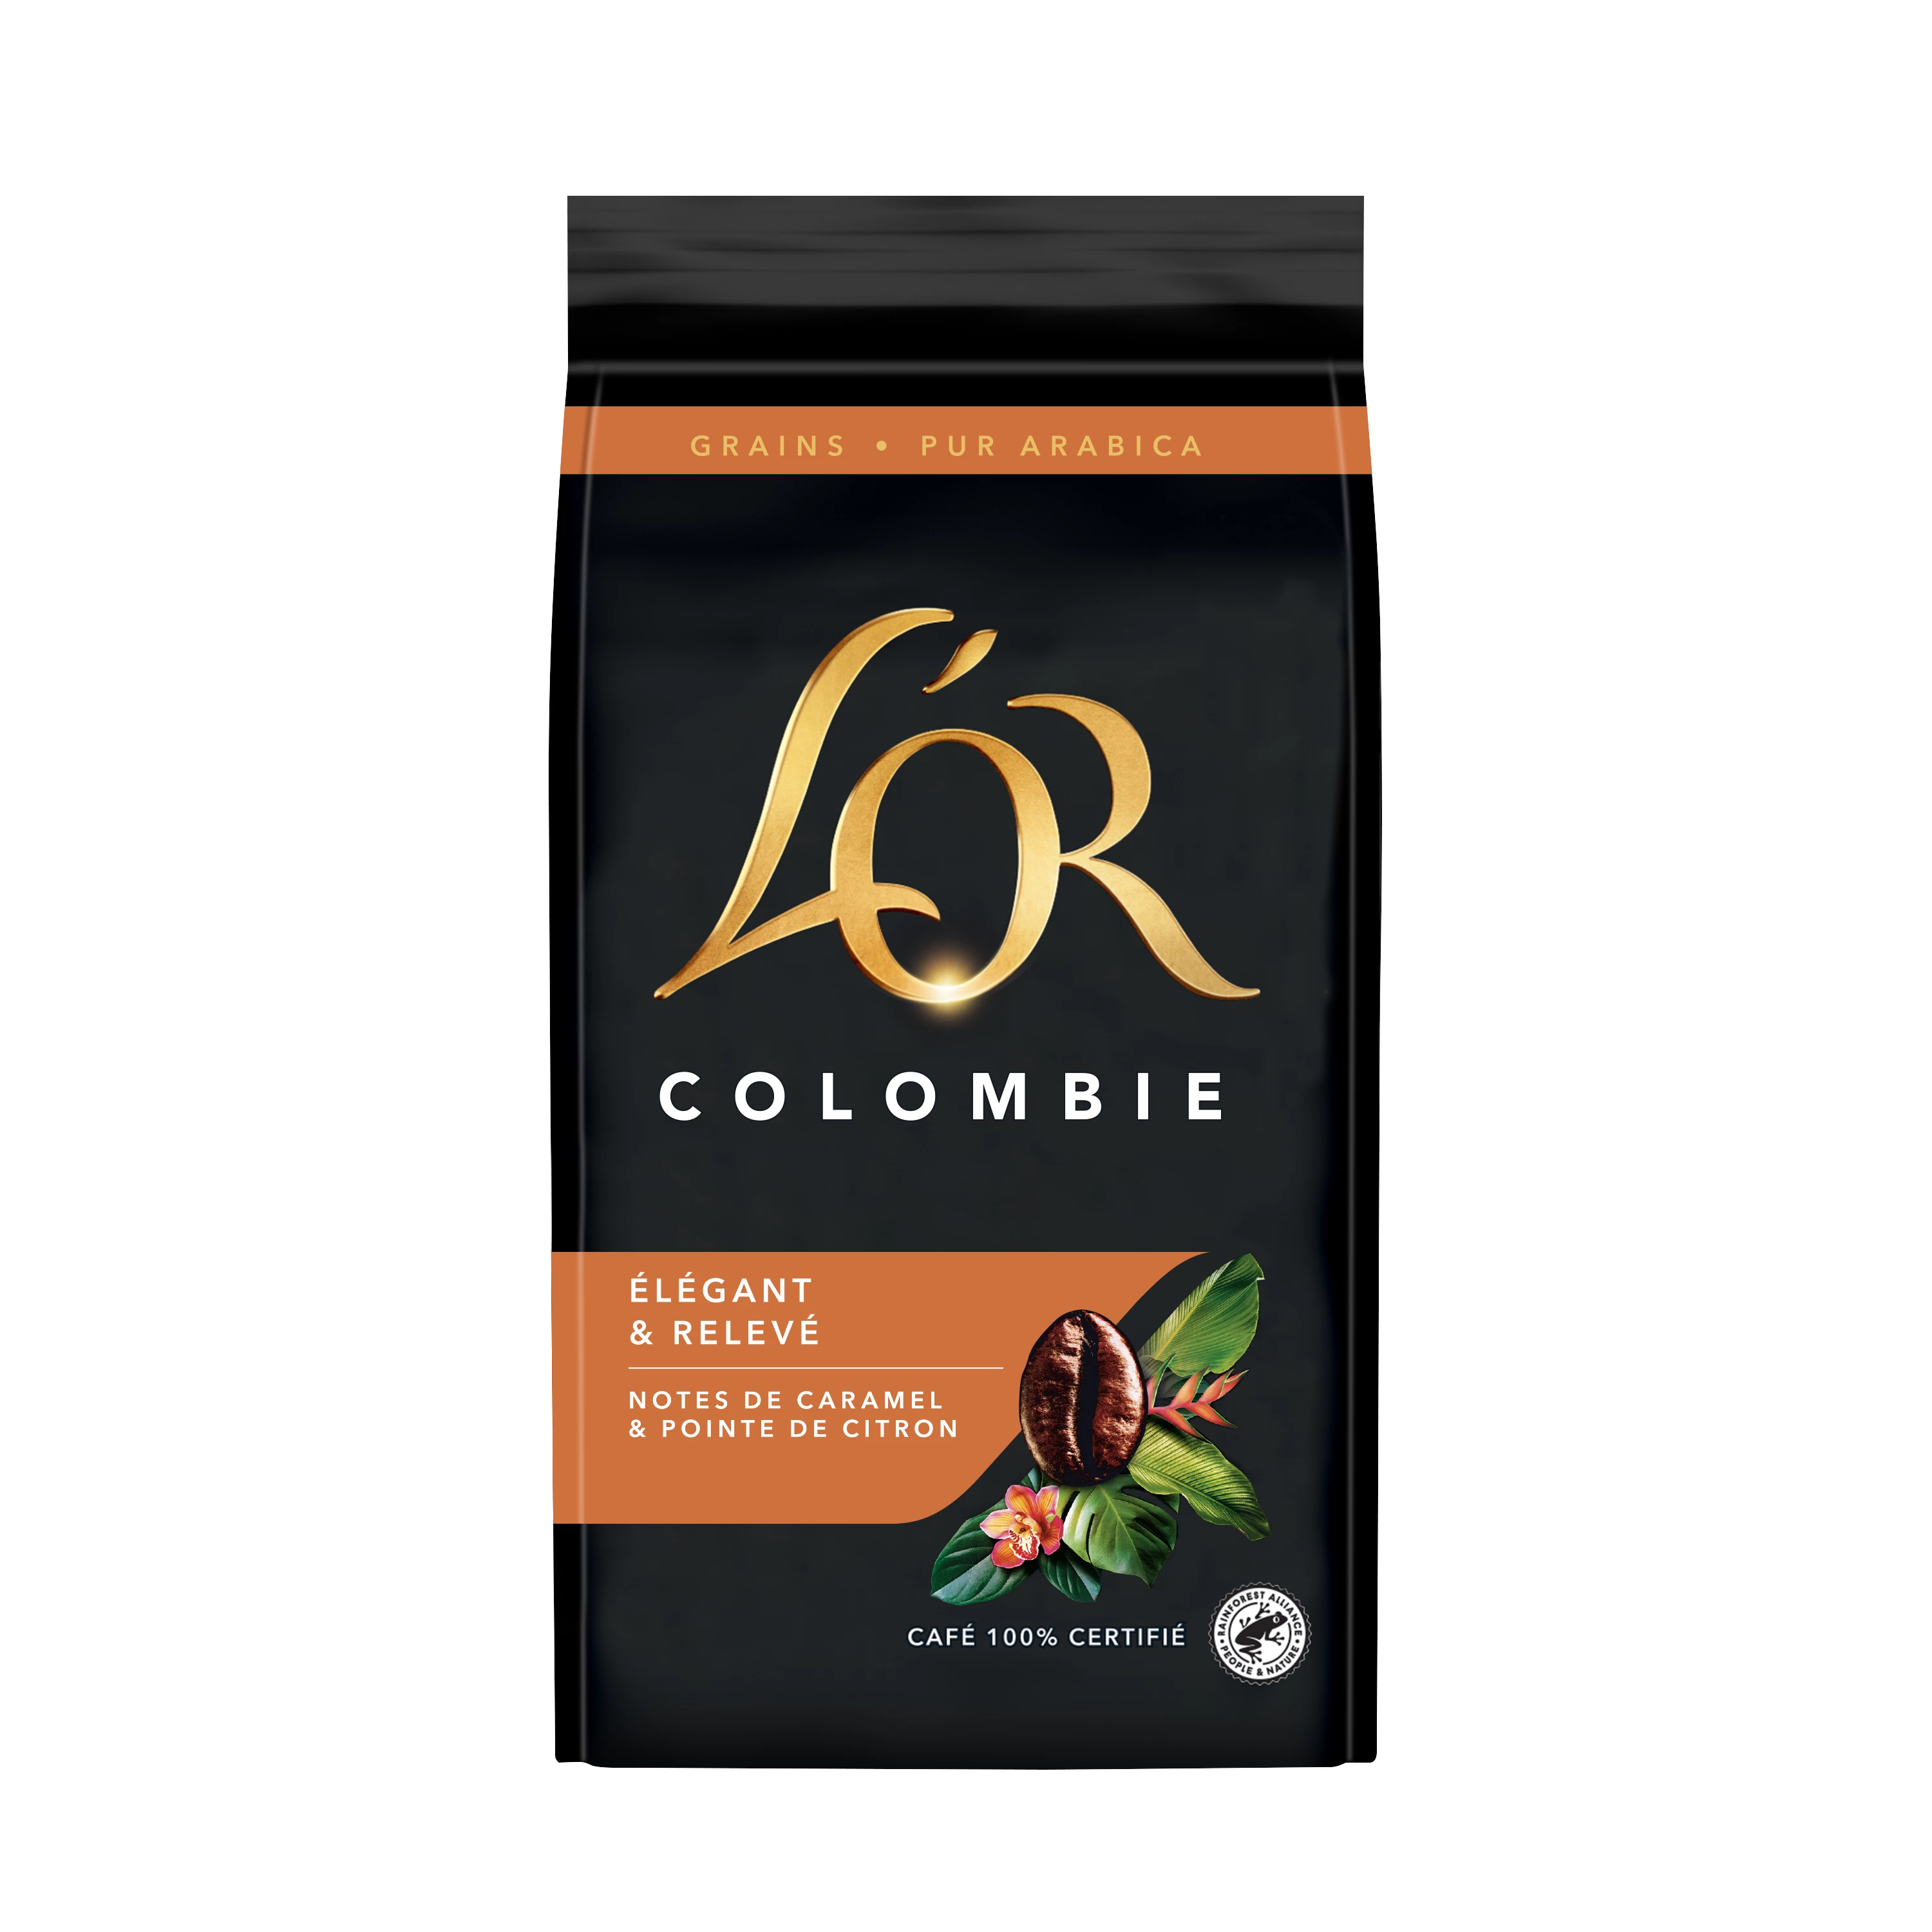 Coffee Beans Colombia; 500g - L'OR